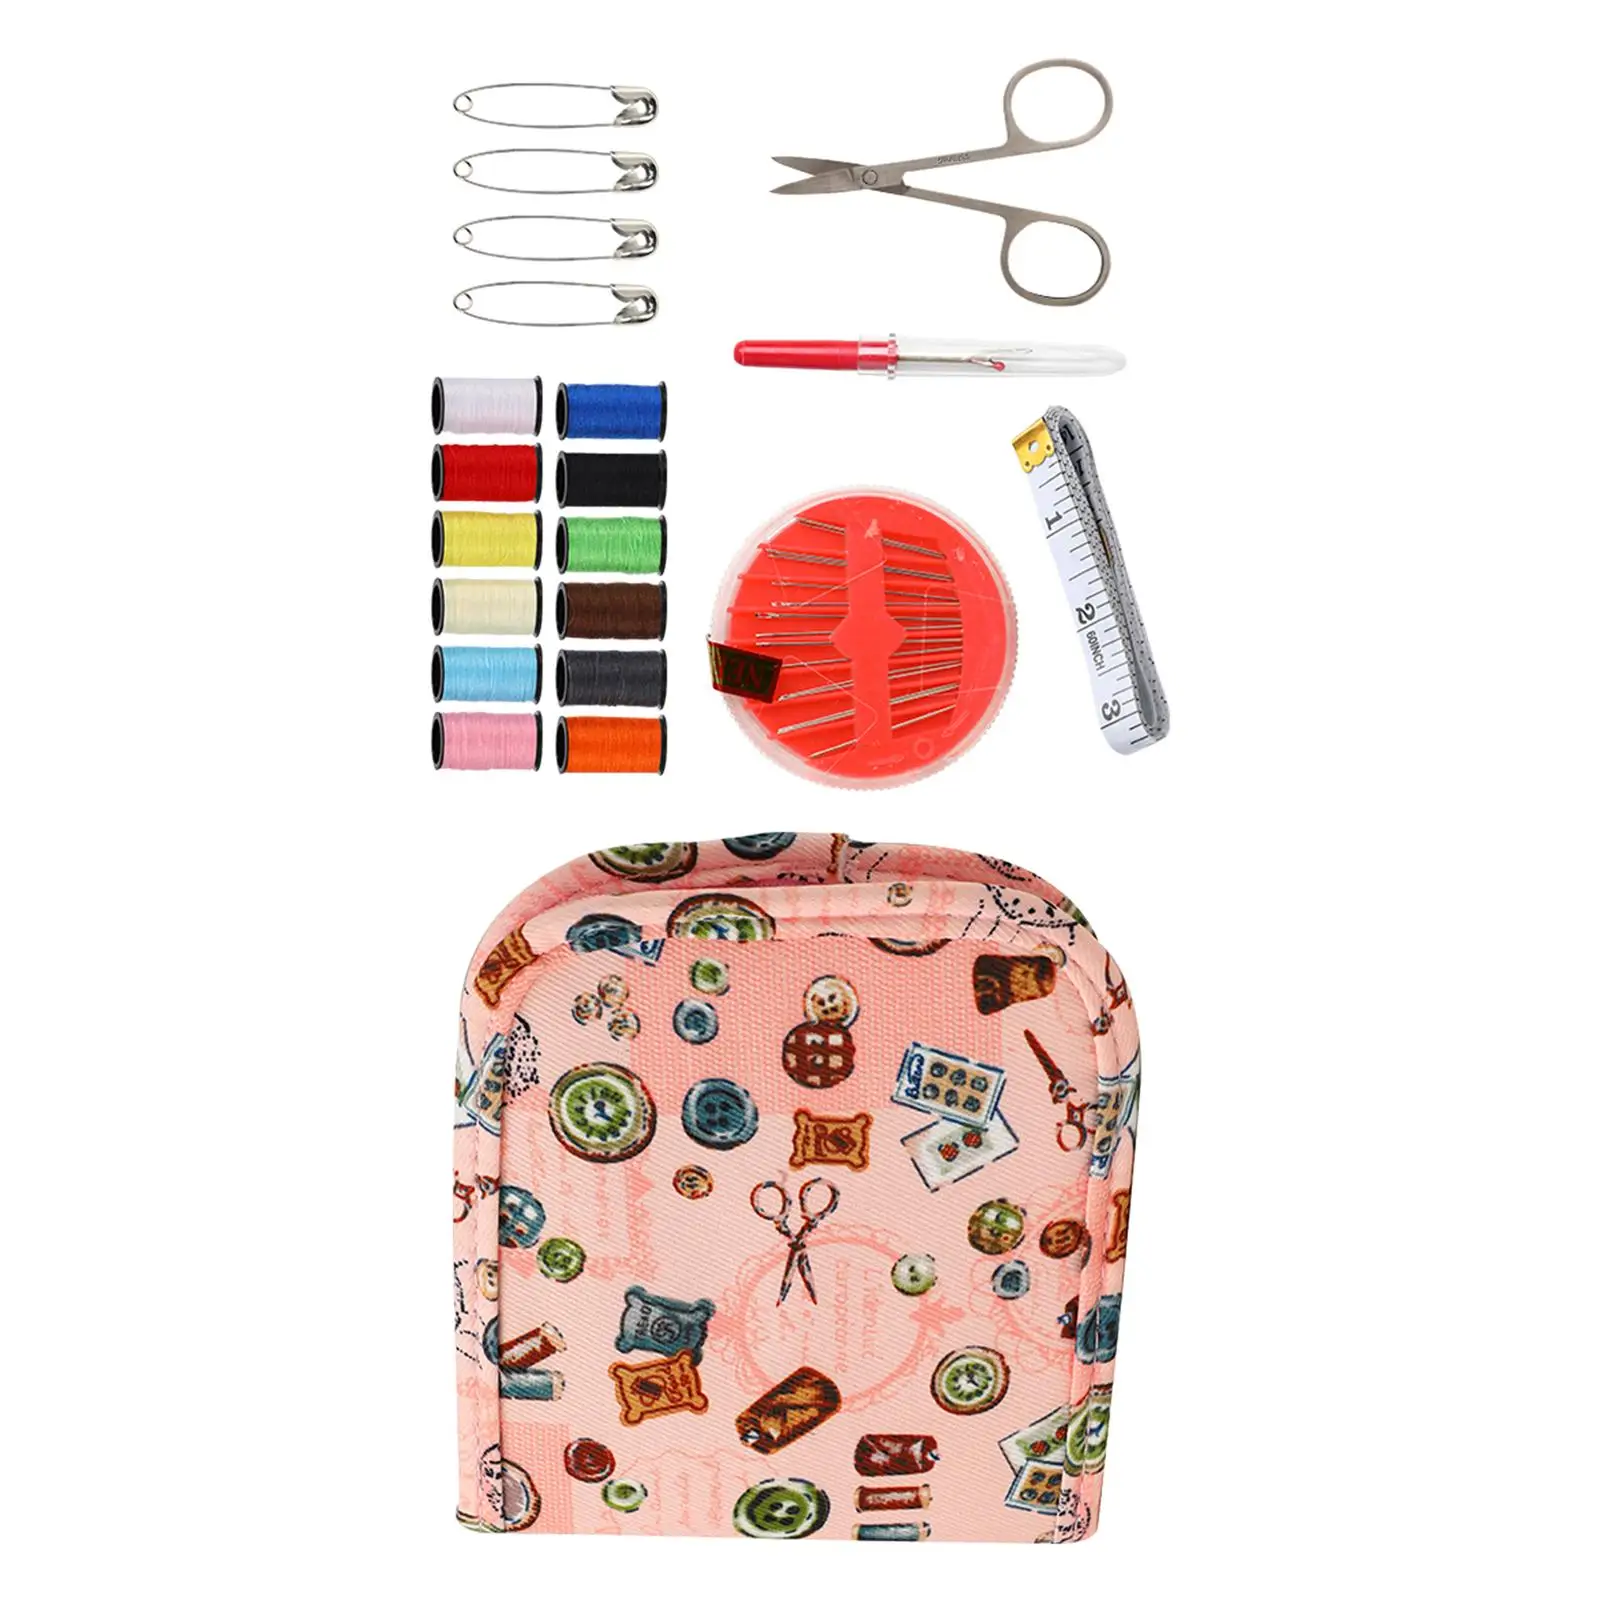 Thread Sewing Needle Set Sewing Tools Set Multicolor Thread with Storage Bag Sewing Supplies Tape Measure Sewing Kits